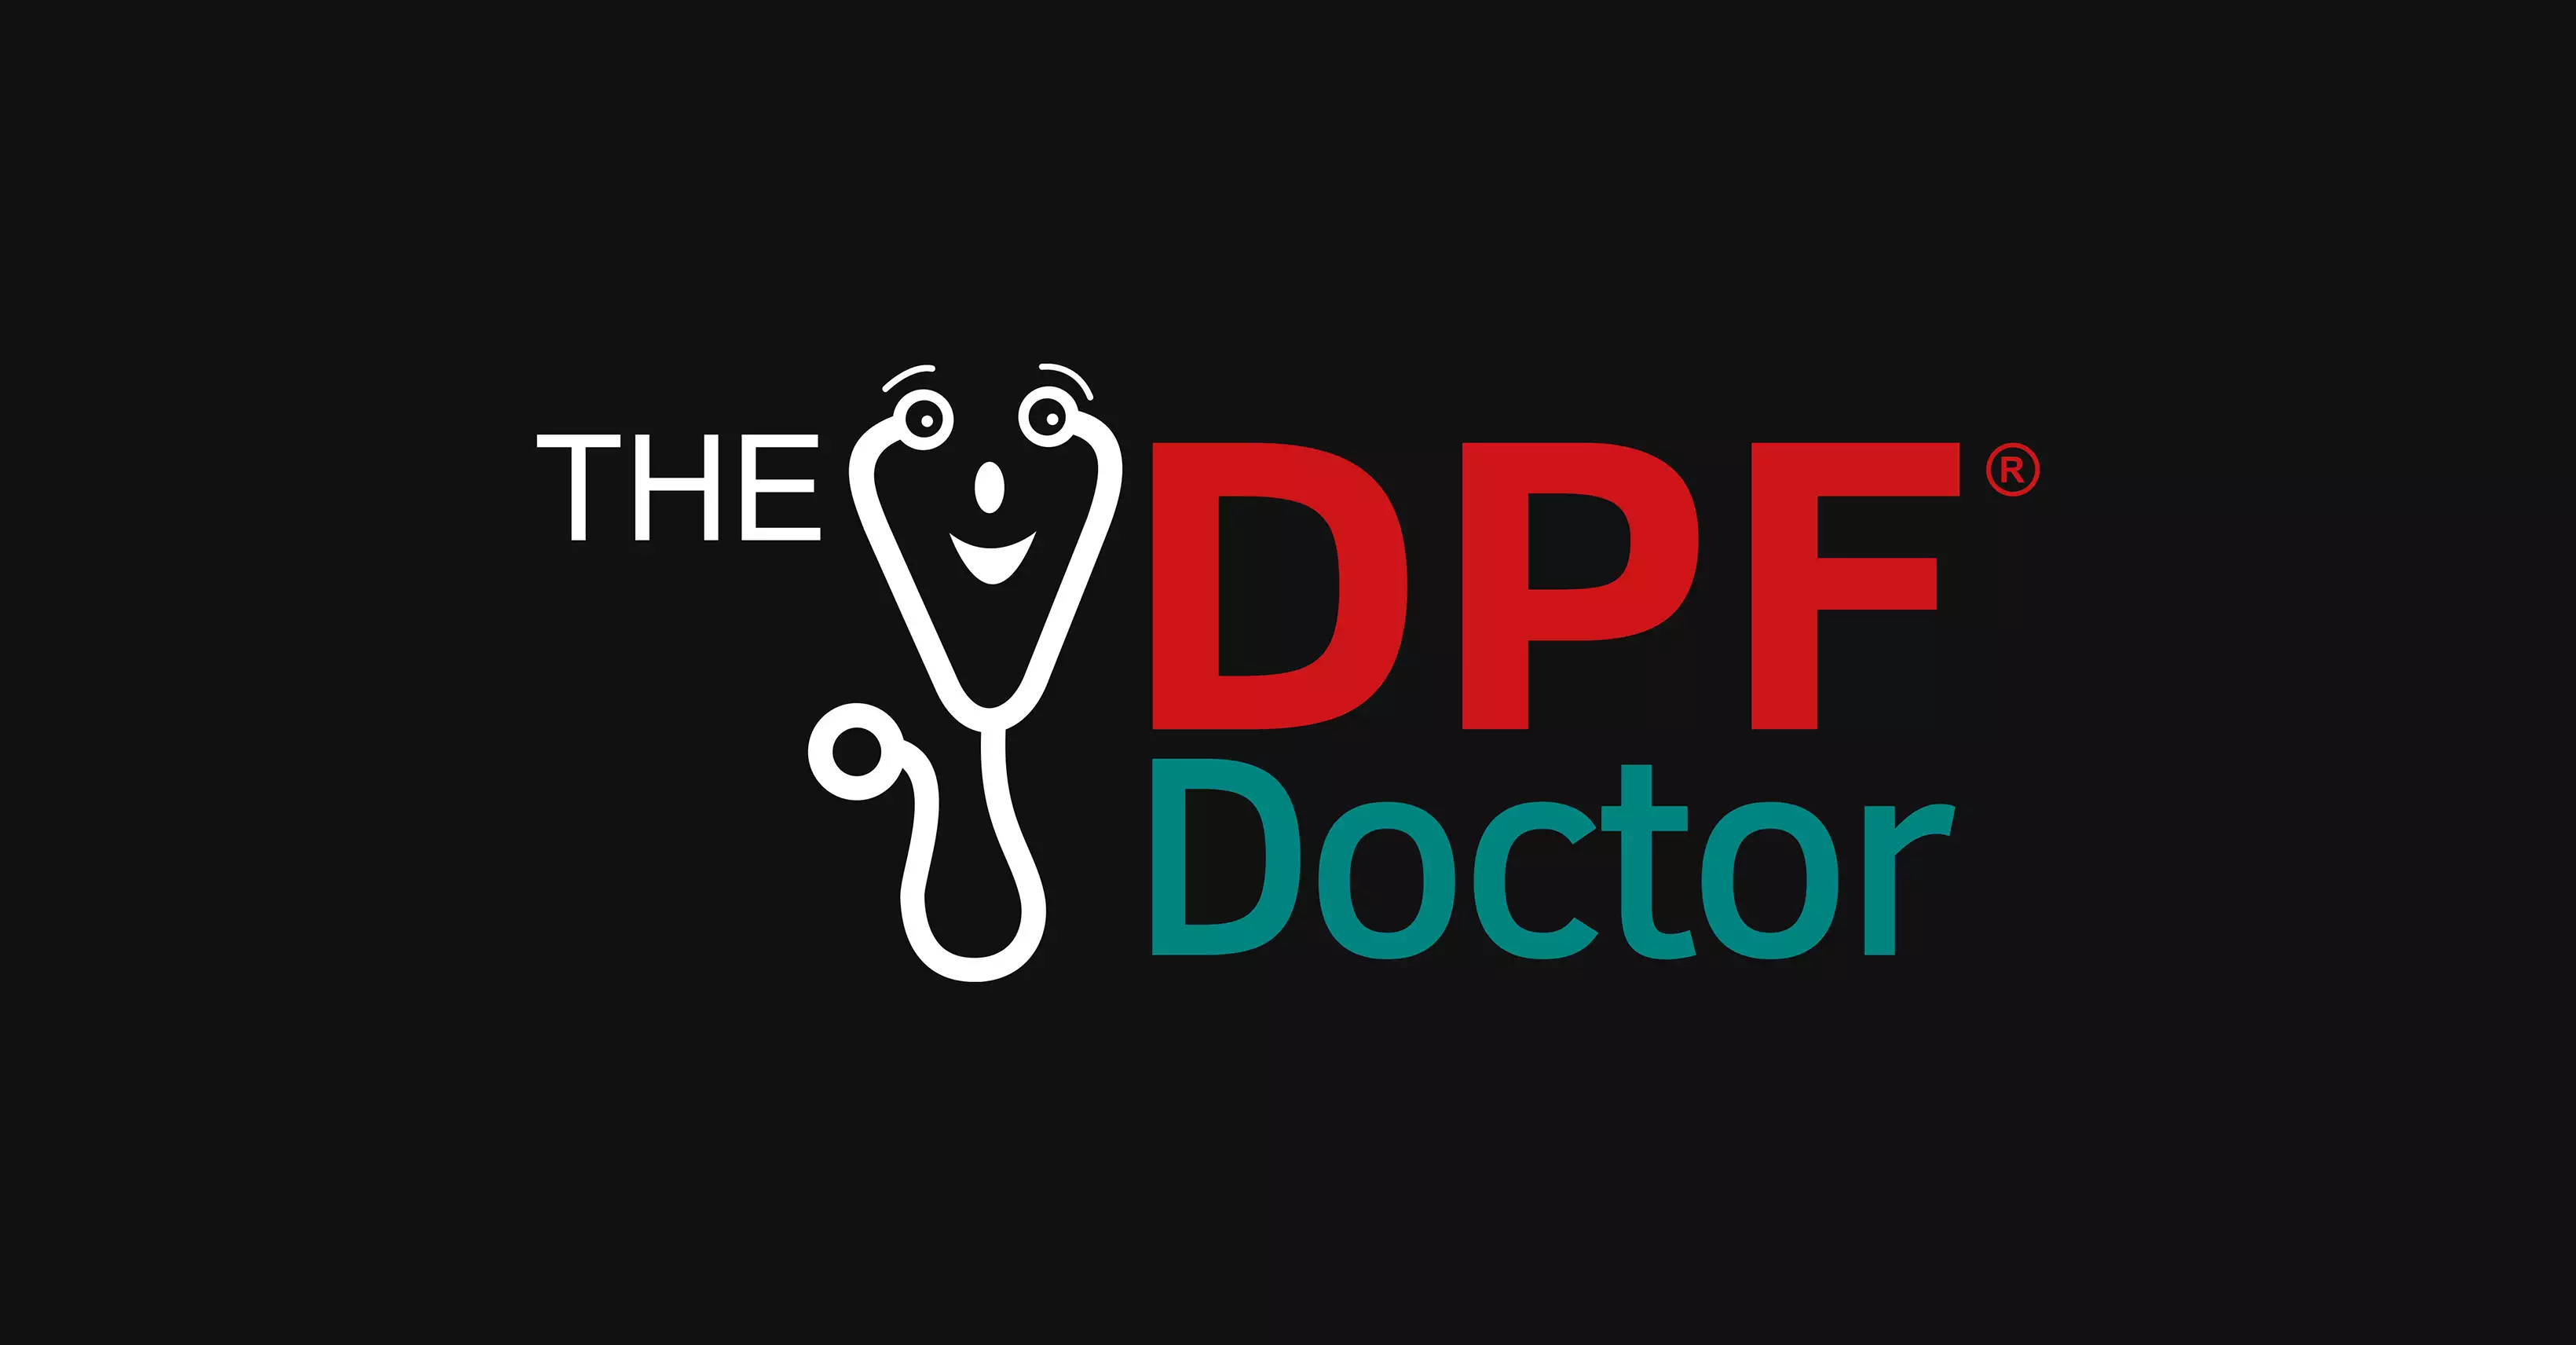 Website Design for The DPF Doctor